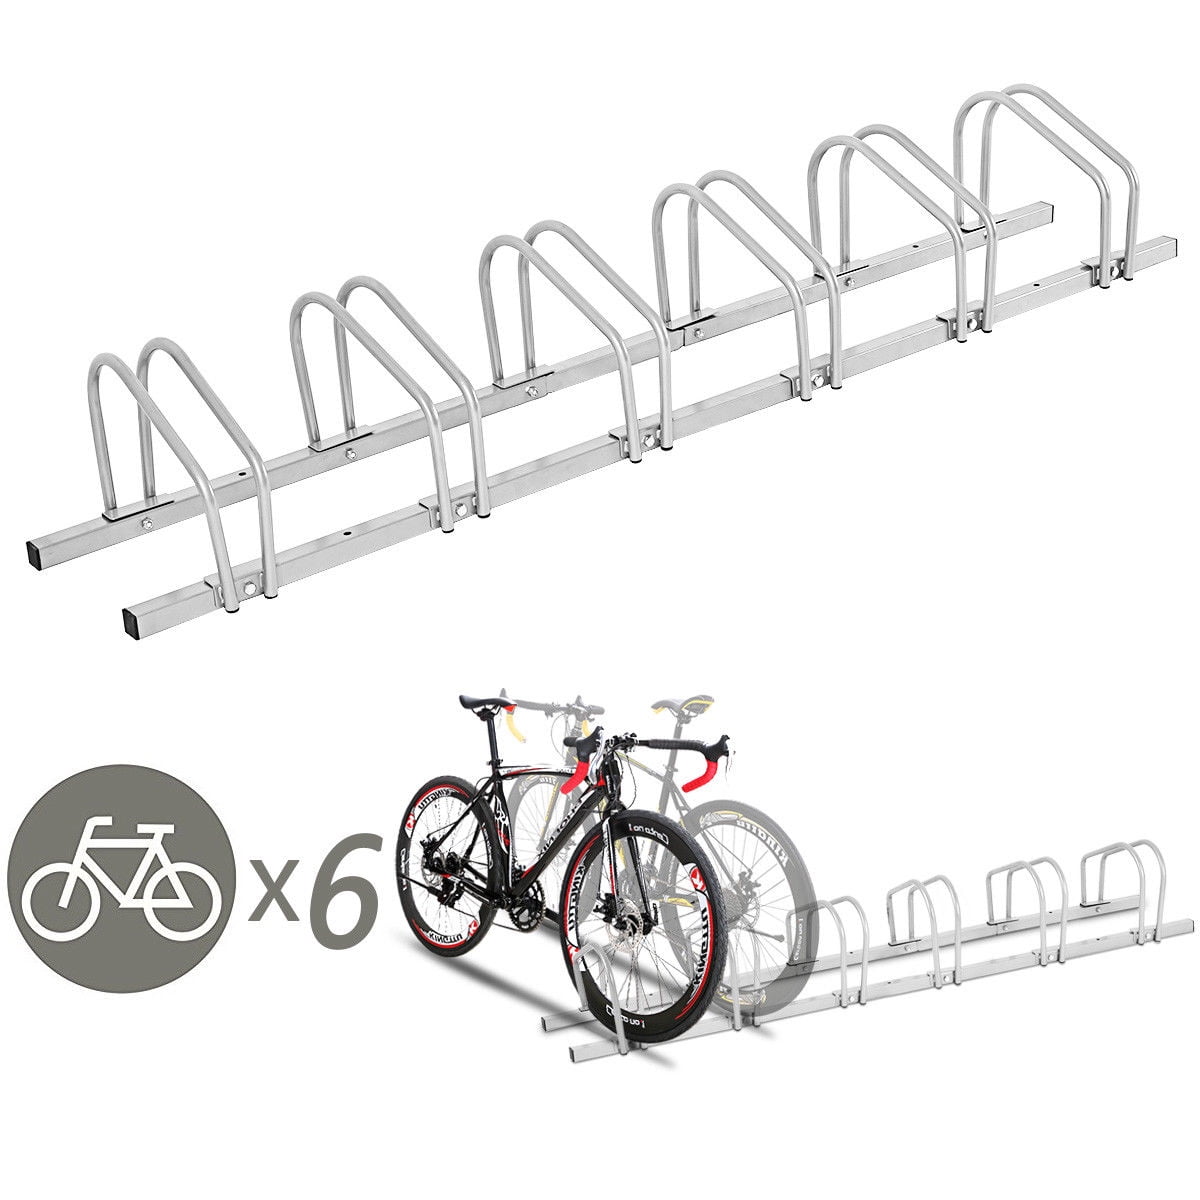 Bike stand parking rack floor or wall mount Bicycle storage Locking stand for 2 cycles PrimeMatik